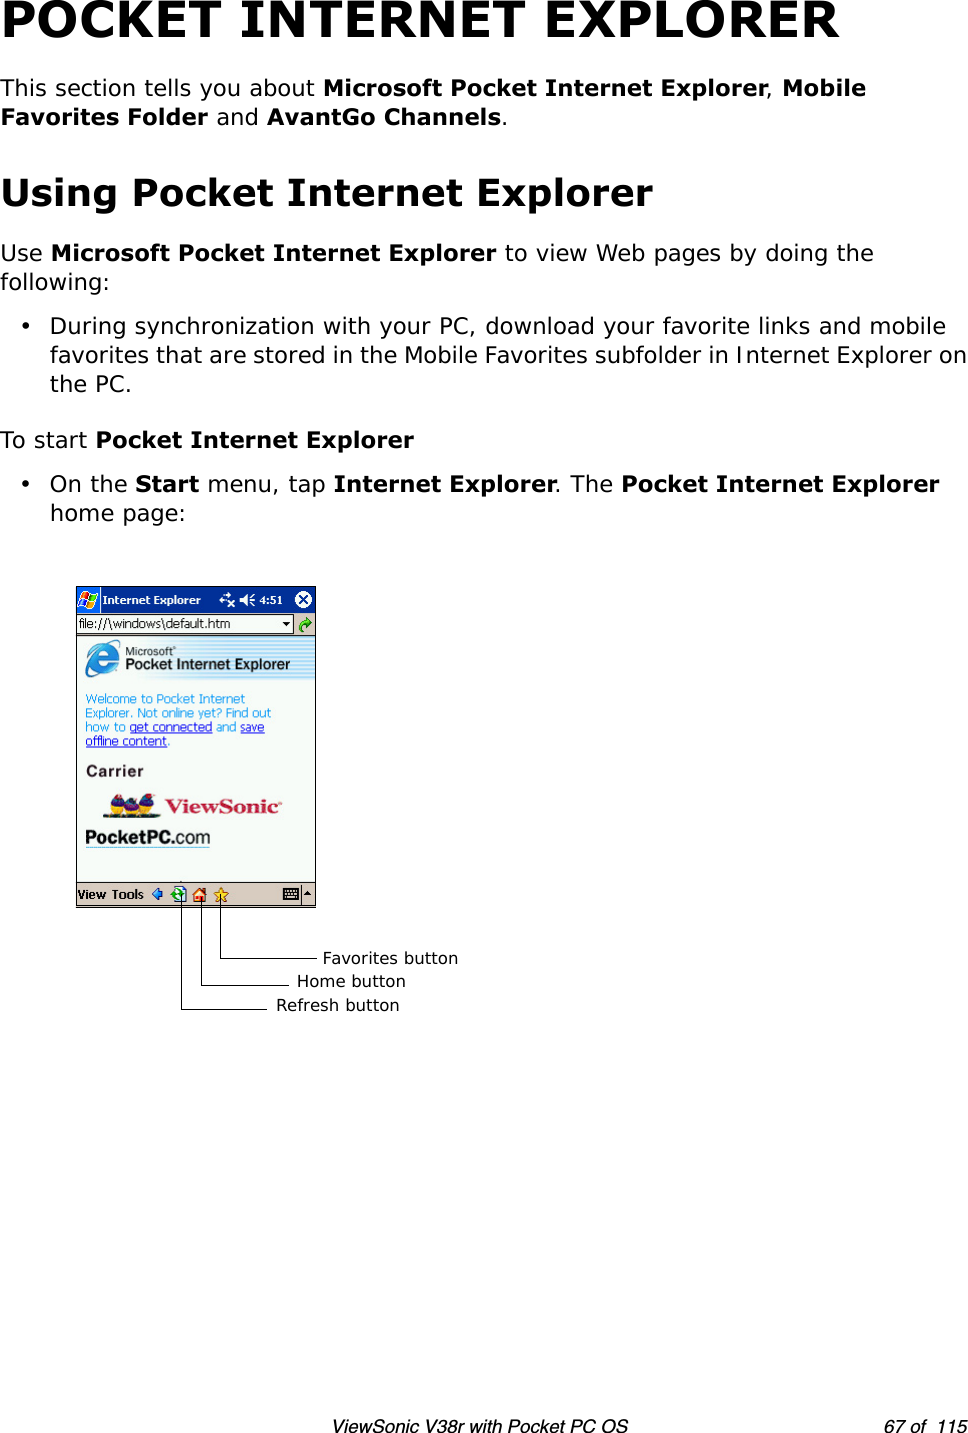 ViewSonic V38r with Pocket PC OS 67 of  115POCKET INTERNET EXPLORERThis section tells you about Microsoft Pocket Internet Explorer, Mobile Favorites Folder and AvantGo Channels.Using Pocket Internet ExplorerUse Microsoft Pocket Internet Explorer to view Web pages by doing the following:• During synchronization with your PC, download your favorite links and mobile favorites that are stored in the Mobile Favorites subfolder in Internet Explorer on the PC.To start Pocket Internet Explorer•On the Start menu, tap Internet Explorer. The Pocket Internet Explorer home page:Favorites buttonHome buttonRefresh button